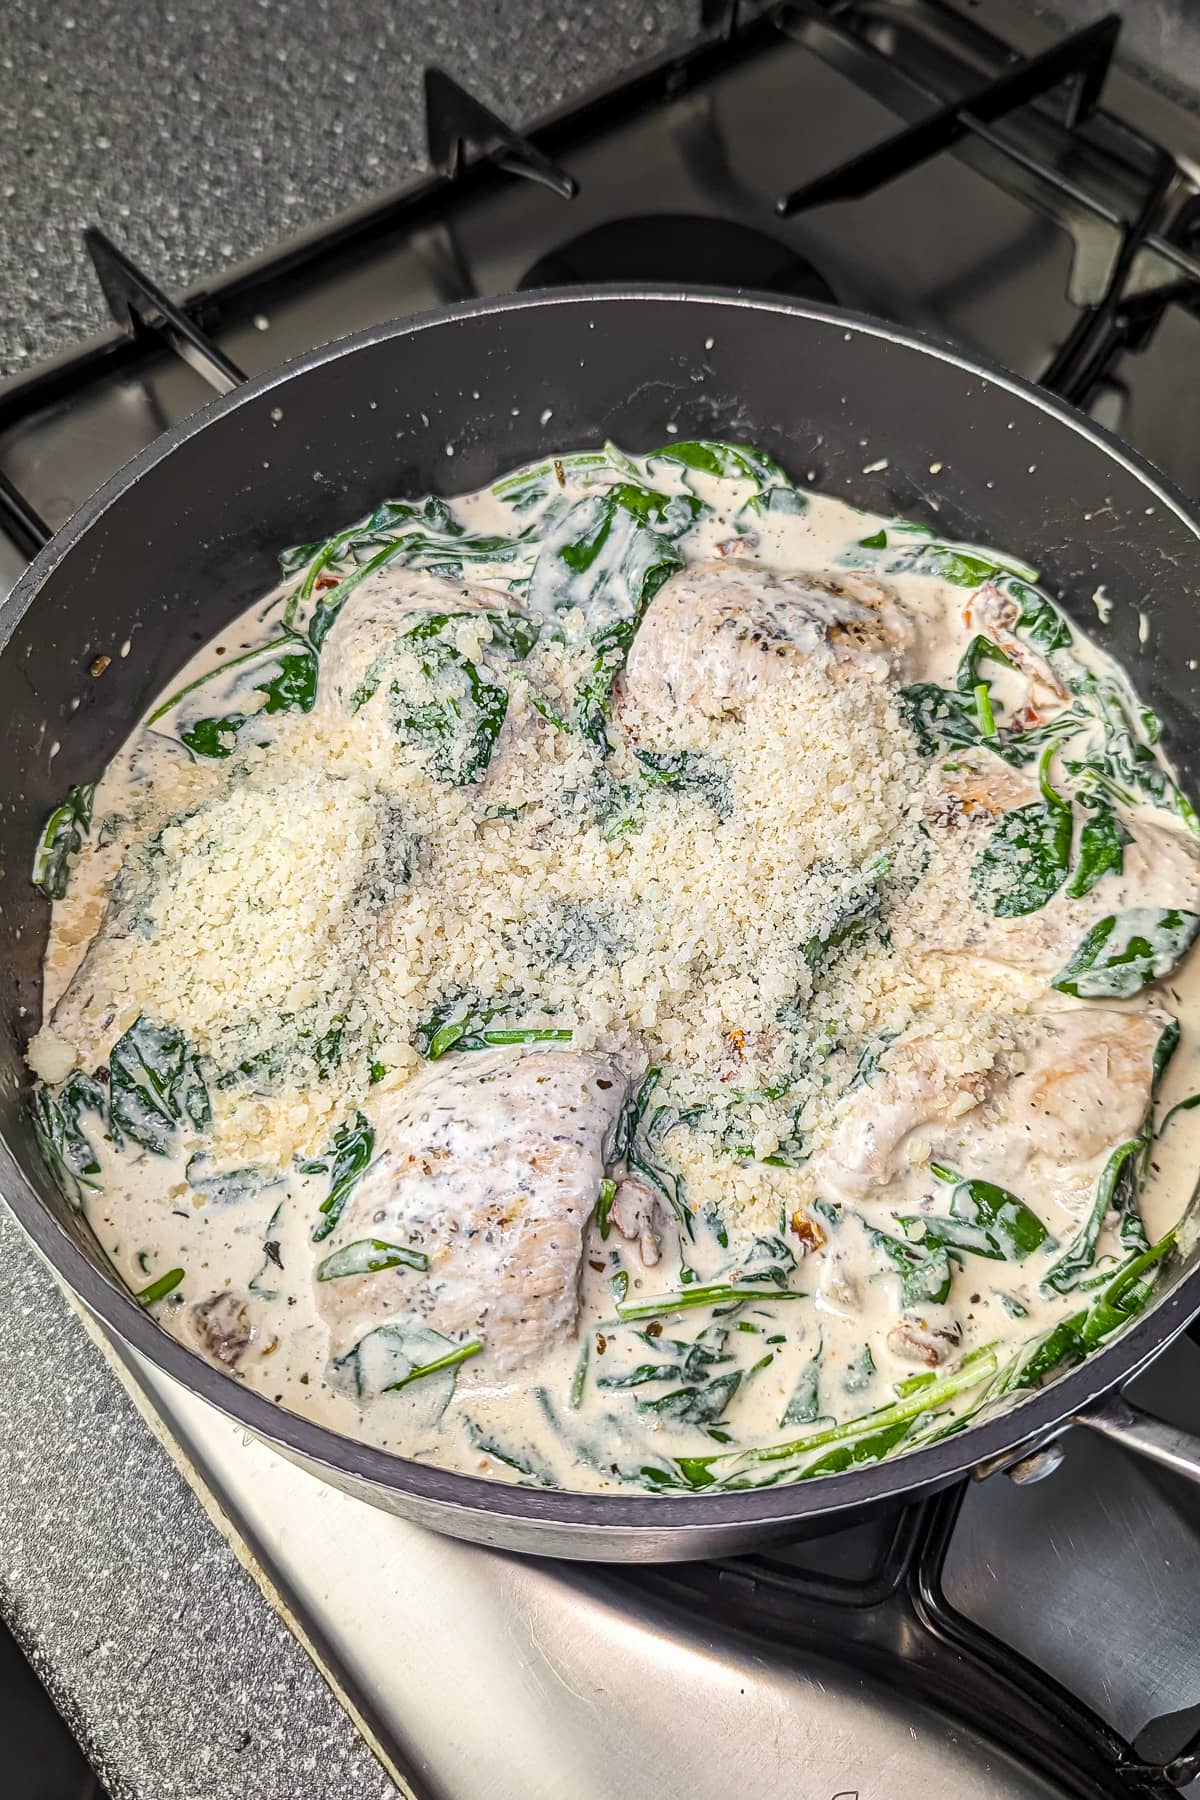 The skillet with Tuscan chicken showing the spinach wilted into the creamy sauce, topped with a sprinkle of Parmesan cheese.